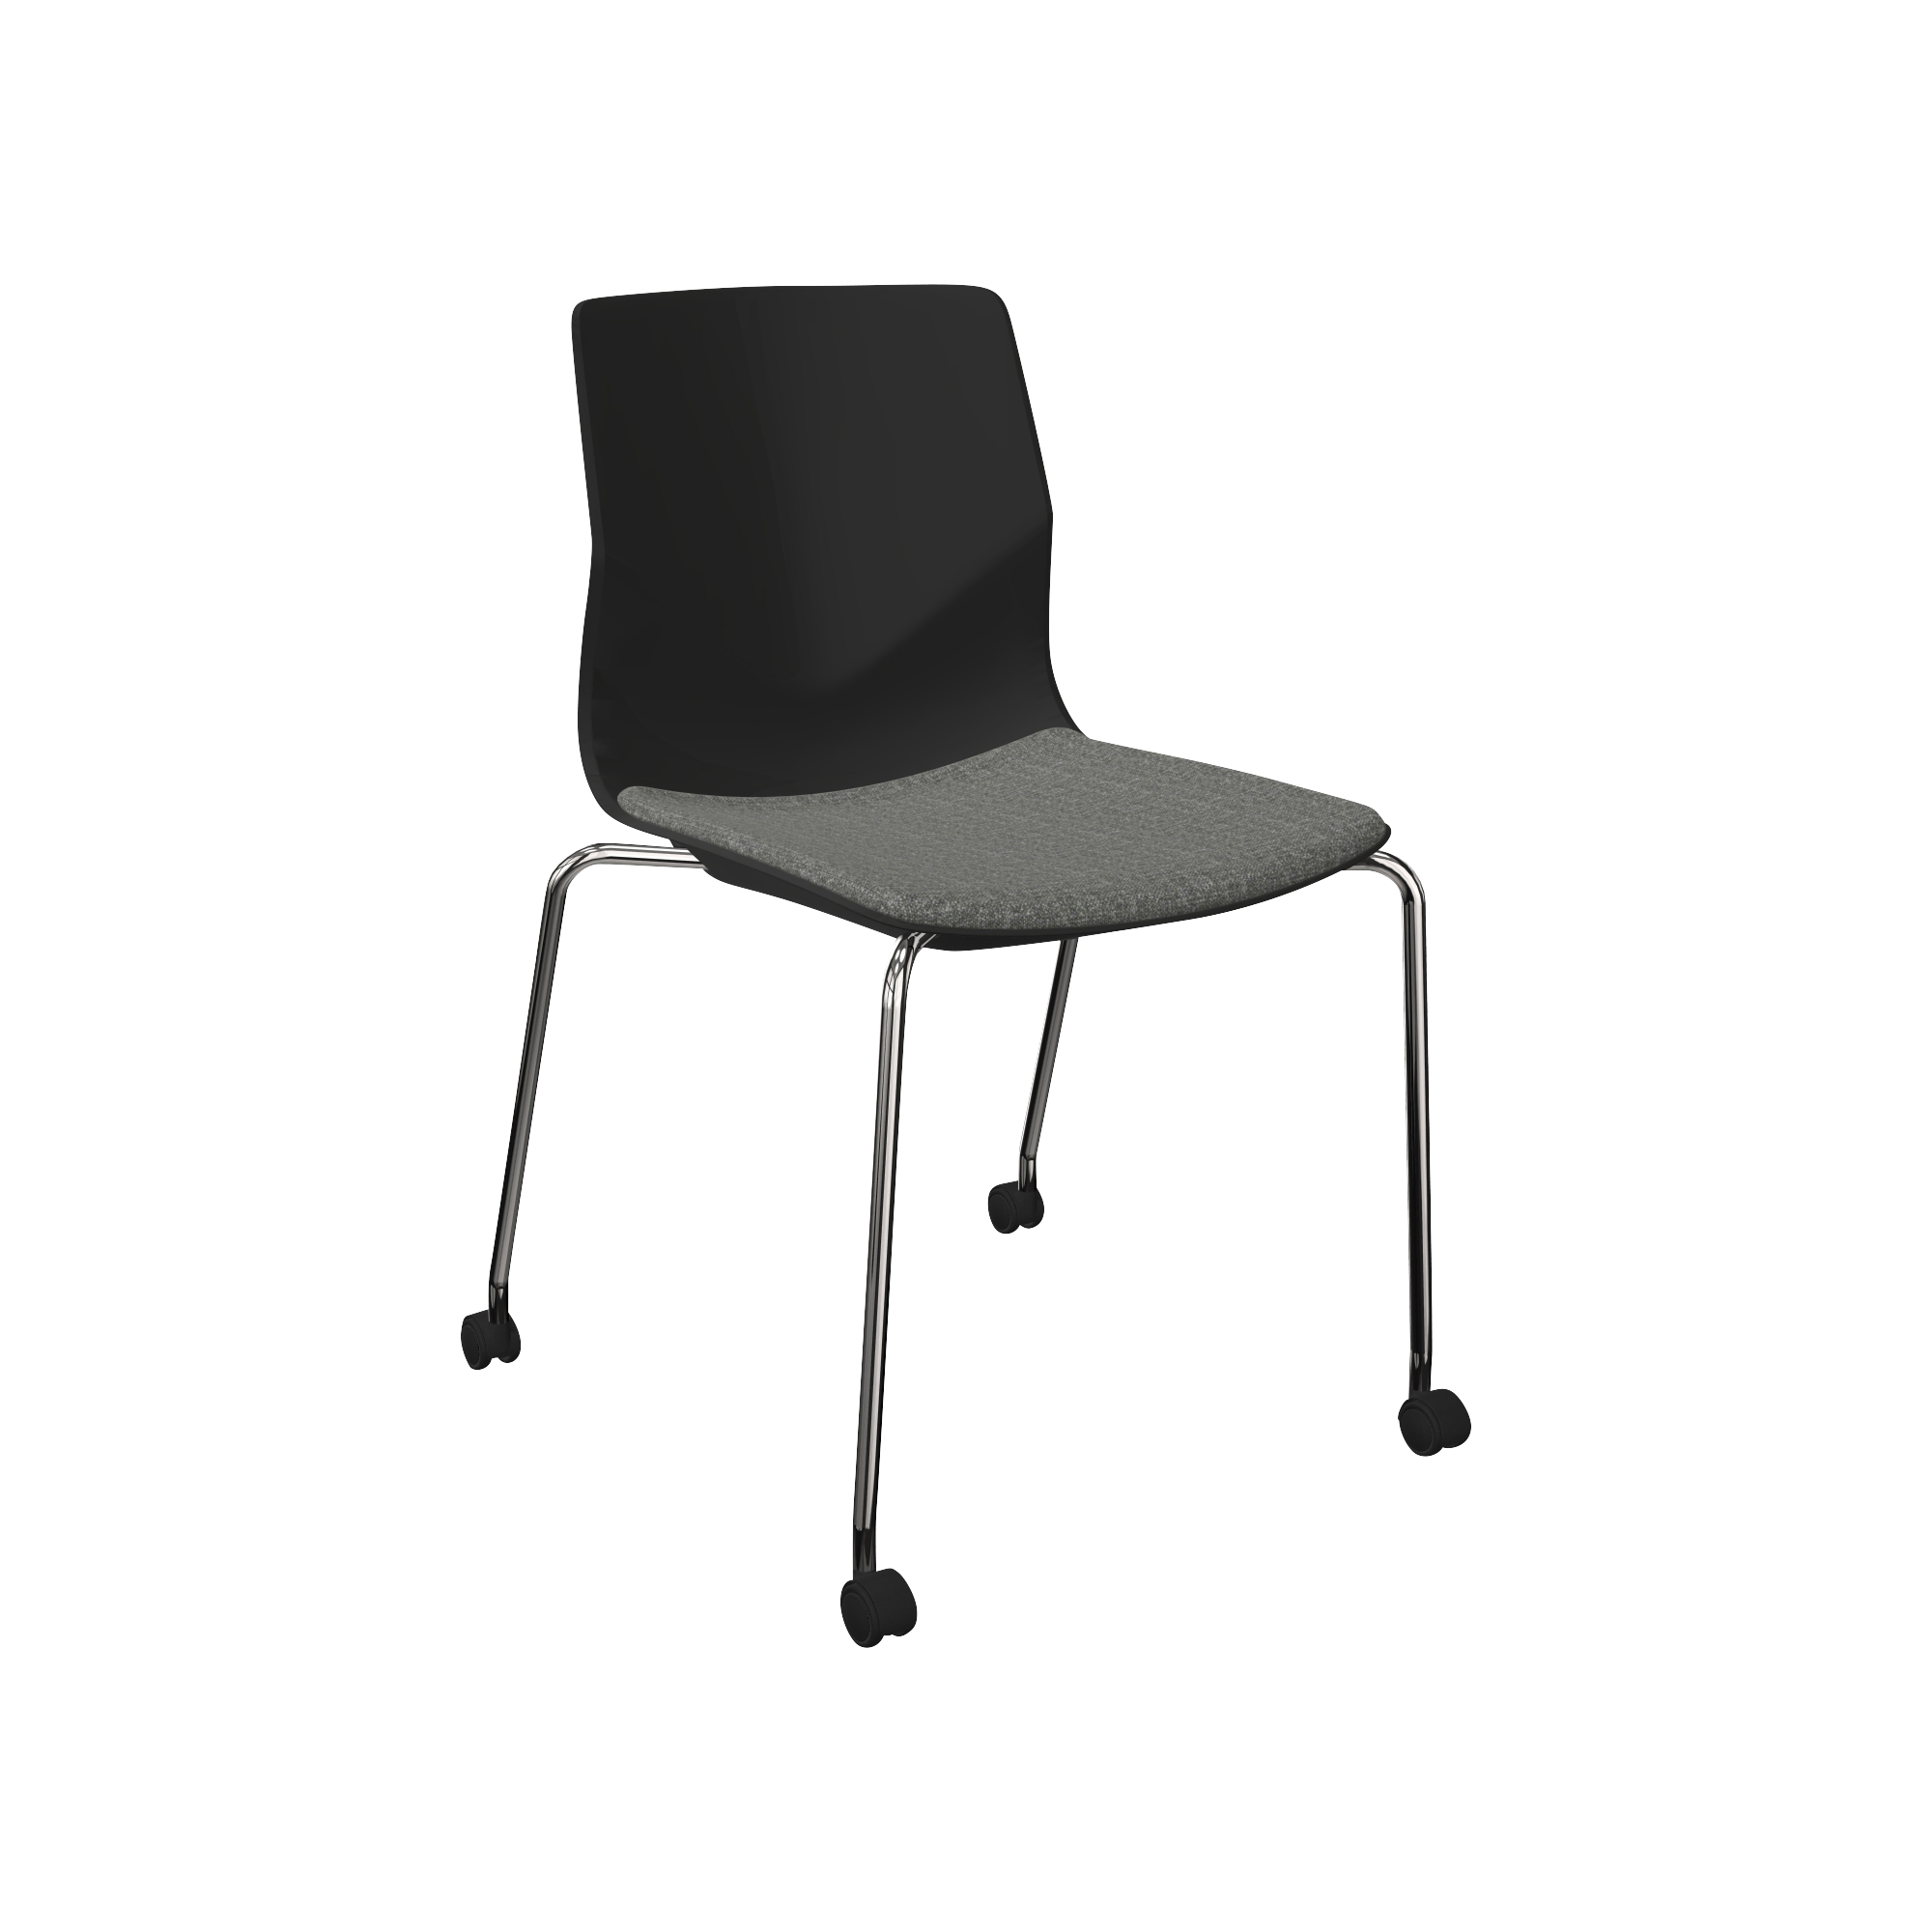 A grey and black chair with wheels